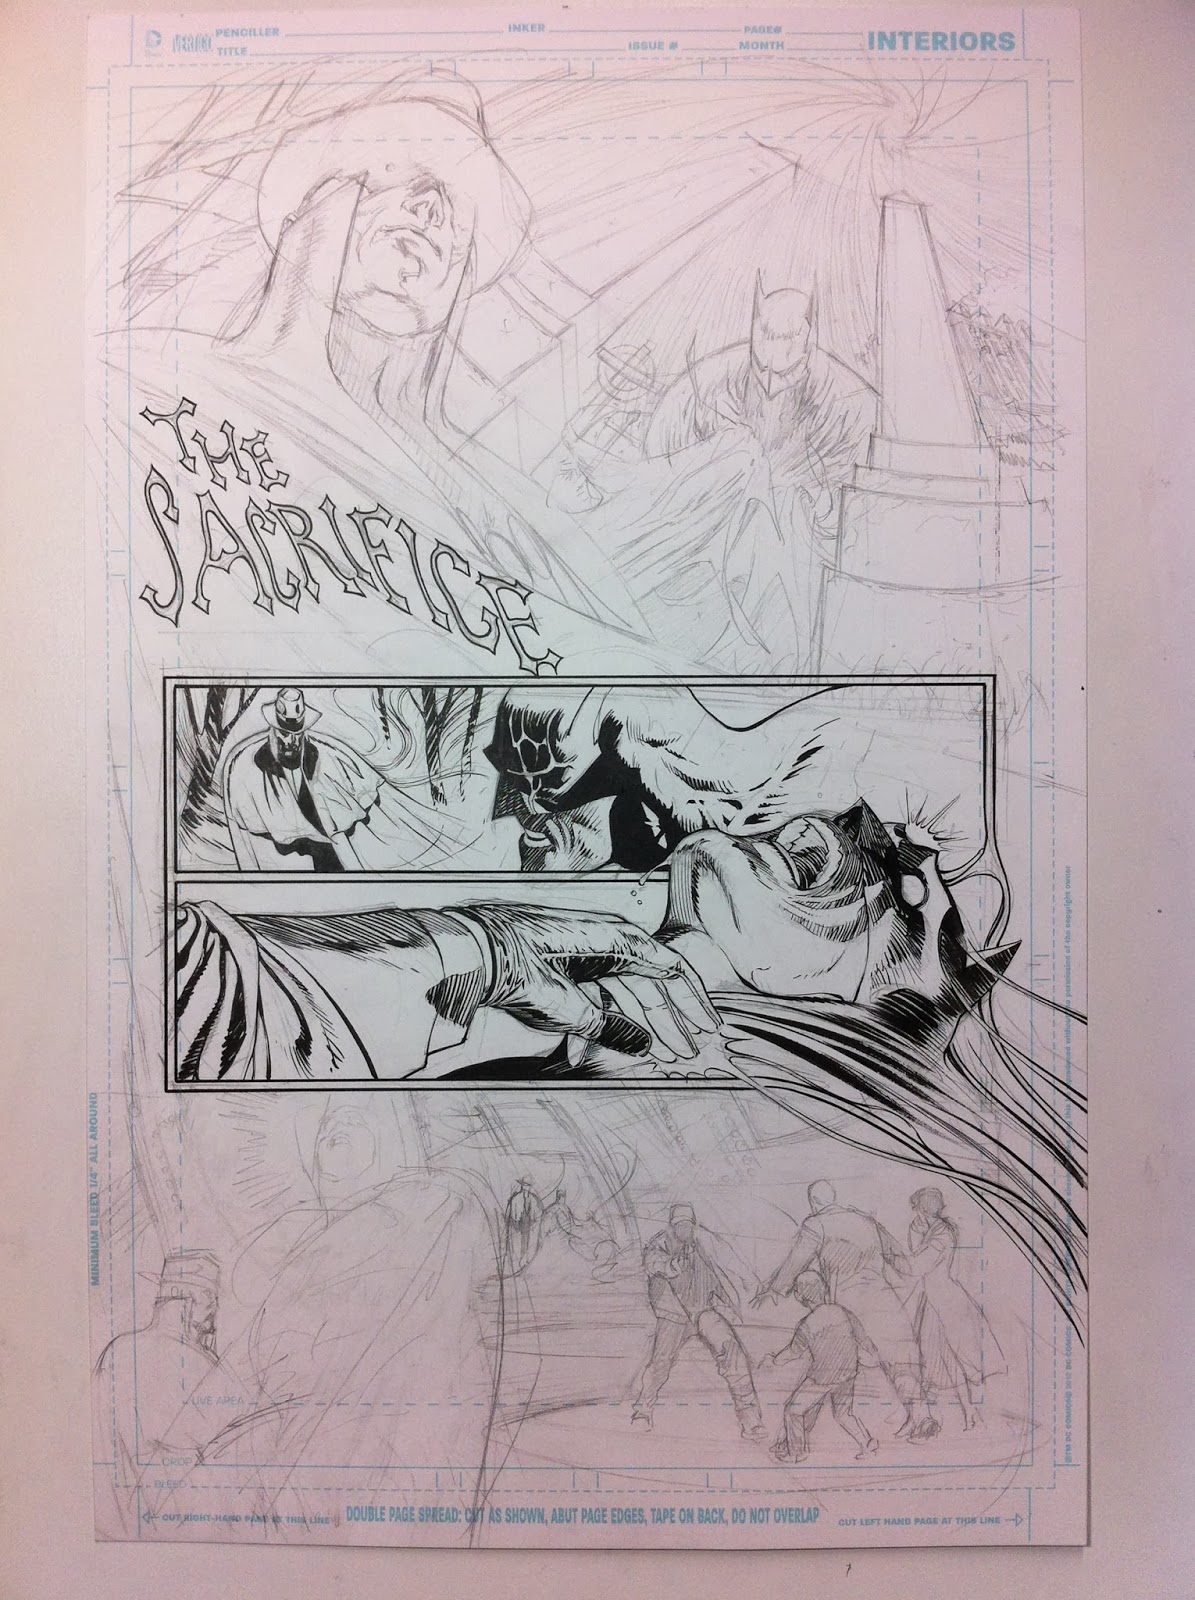 Making of a page: DETECTIVE COMICS #27 by Guillem March